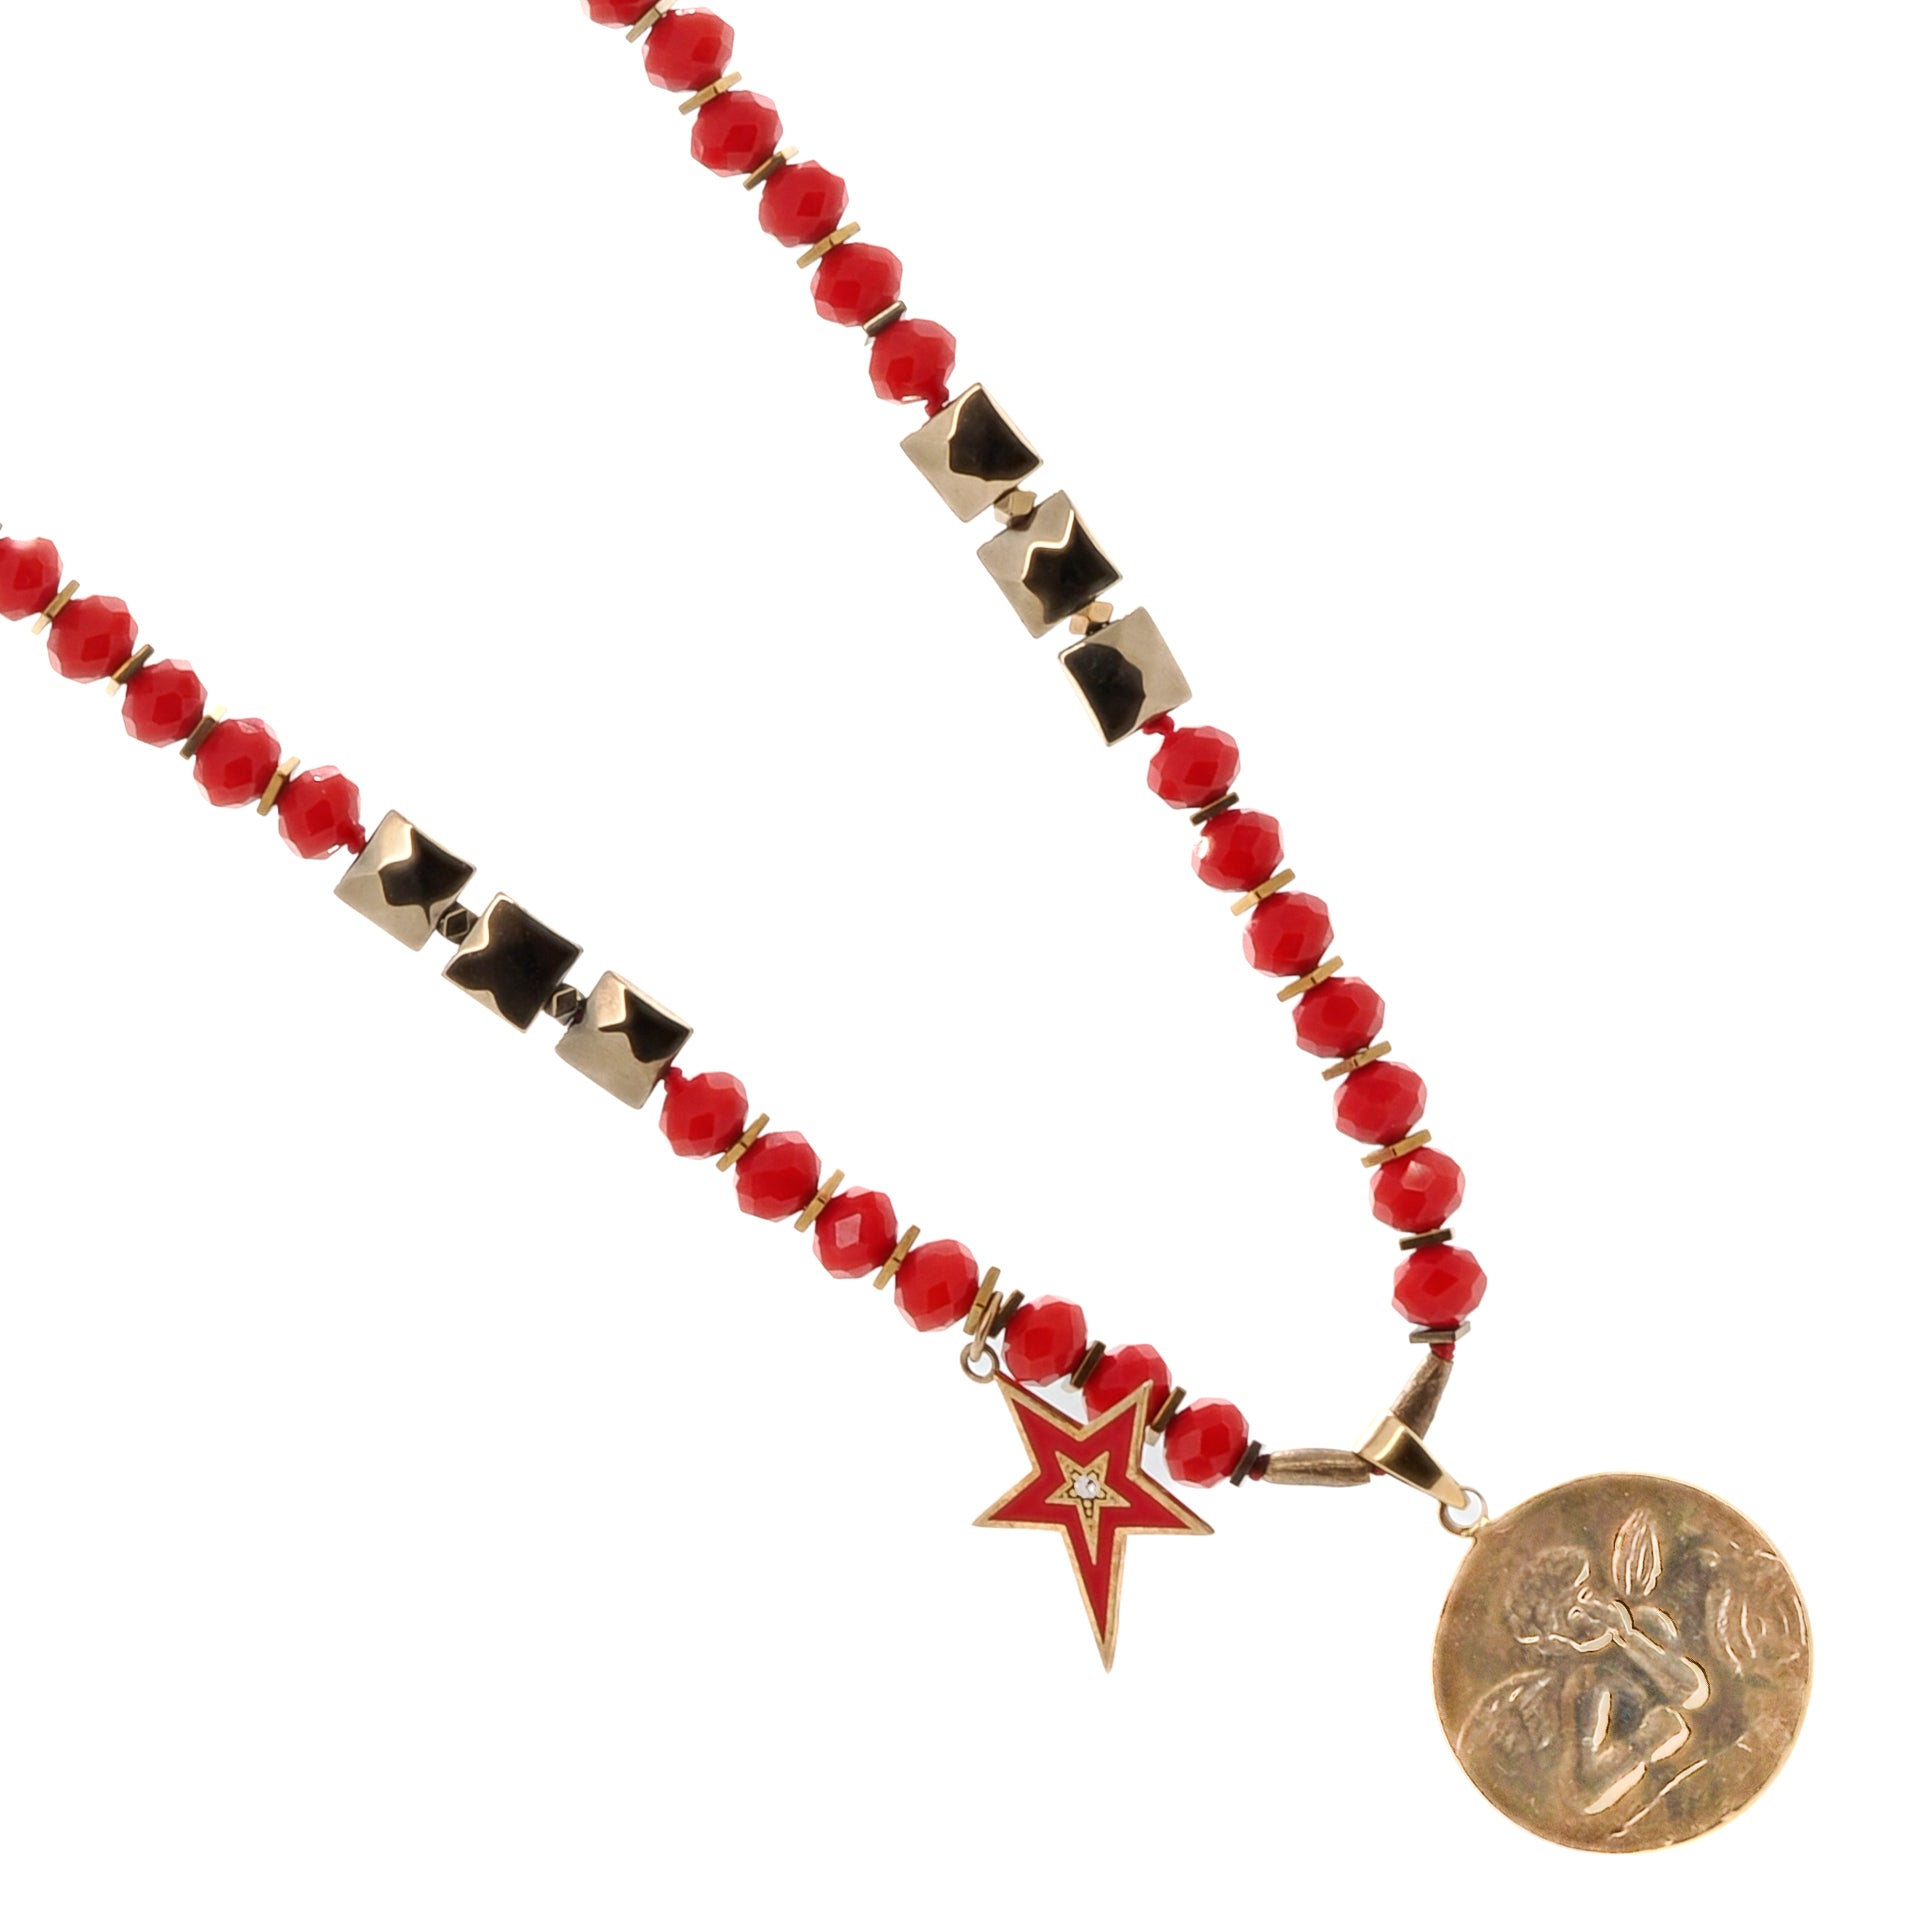 Red crystal beads and gold accents make the Angel Protector Necklace a unique and stylish accessory